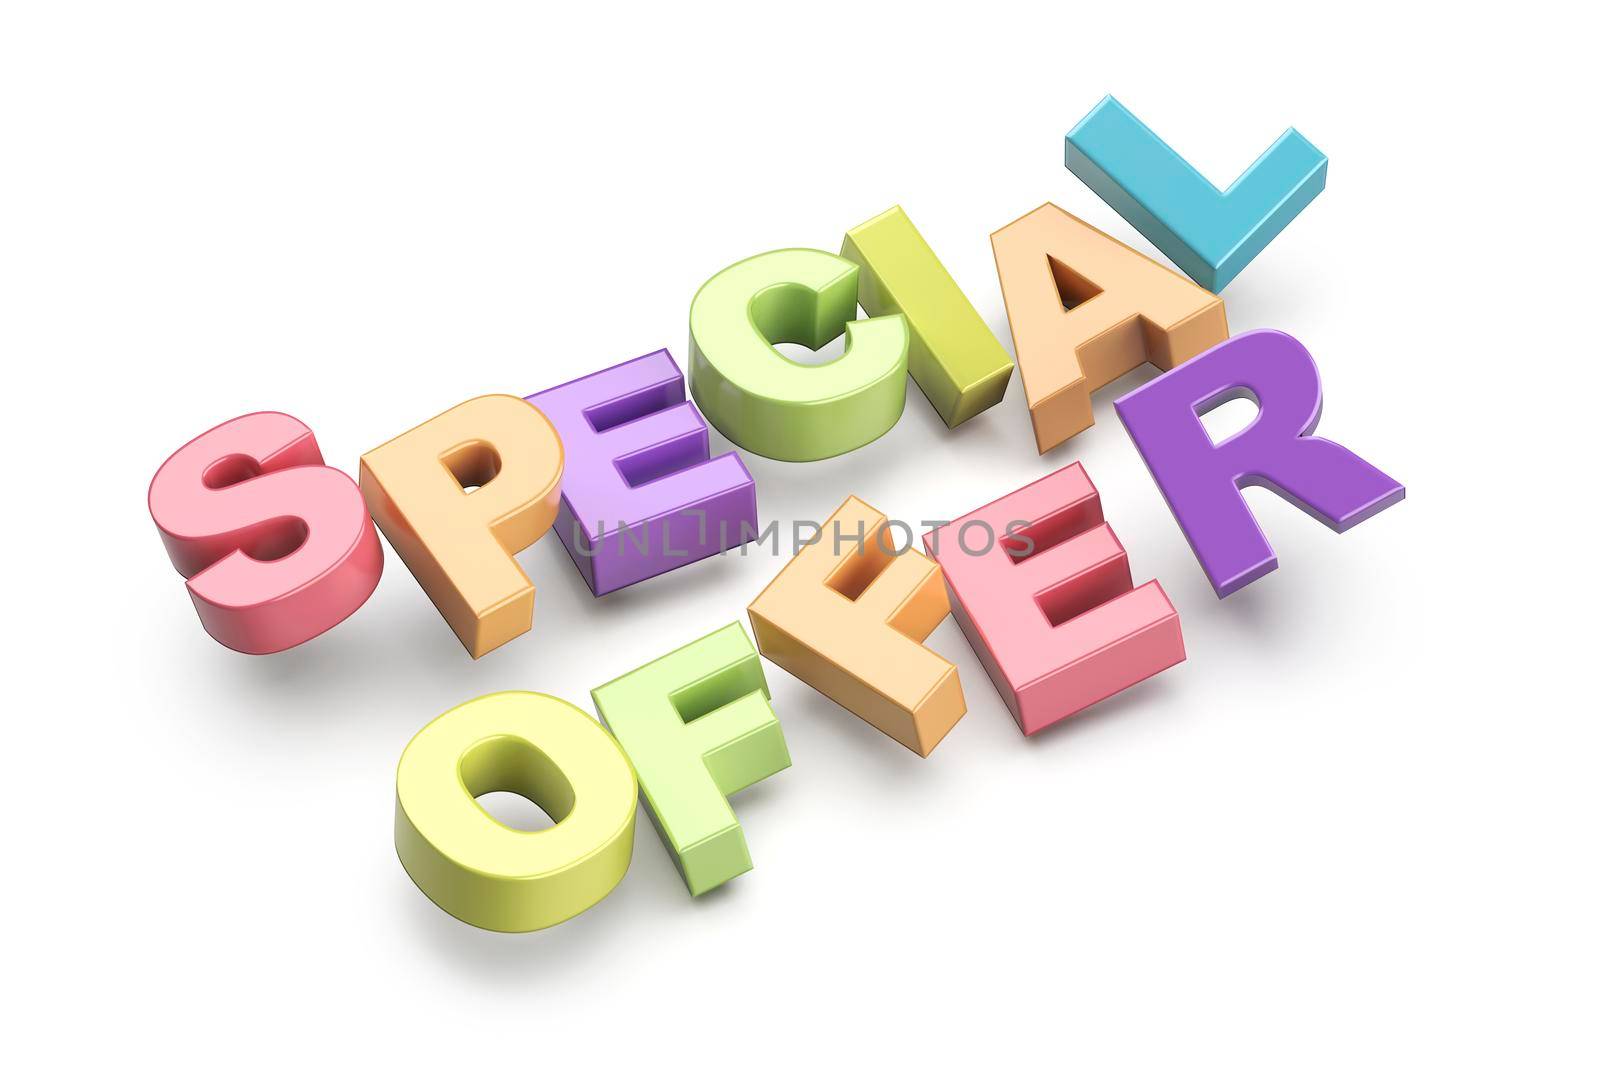 Special offer promo text with colorful letters on white background